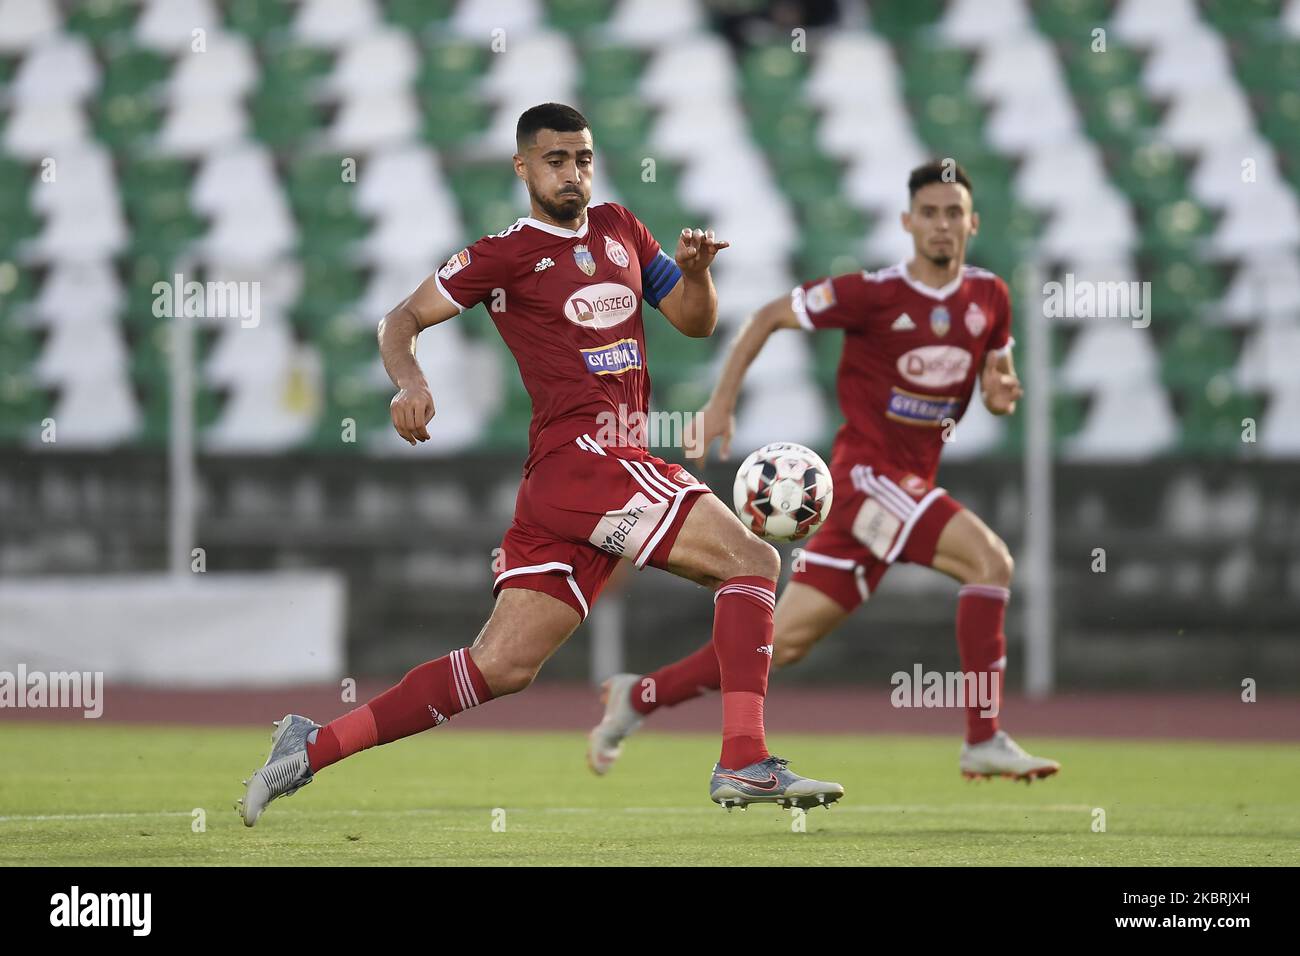 Rachid Bouhenna of Sepsi OSK in action during semifinal of the